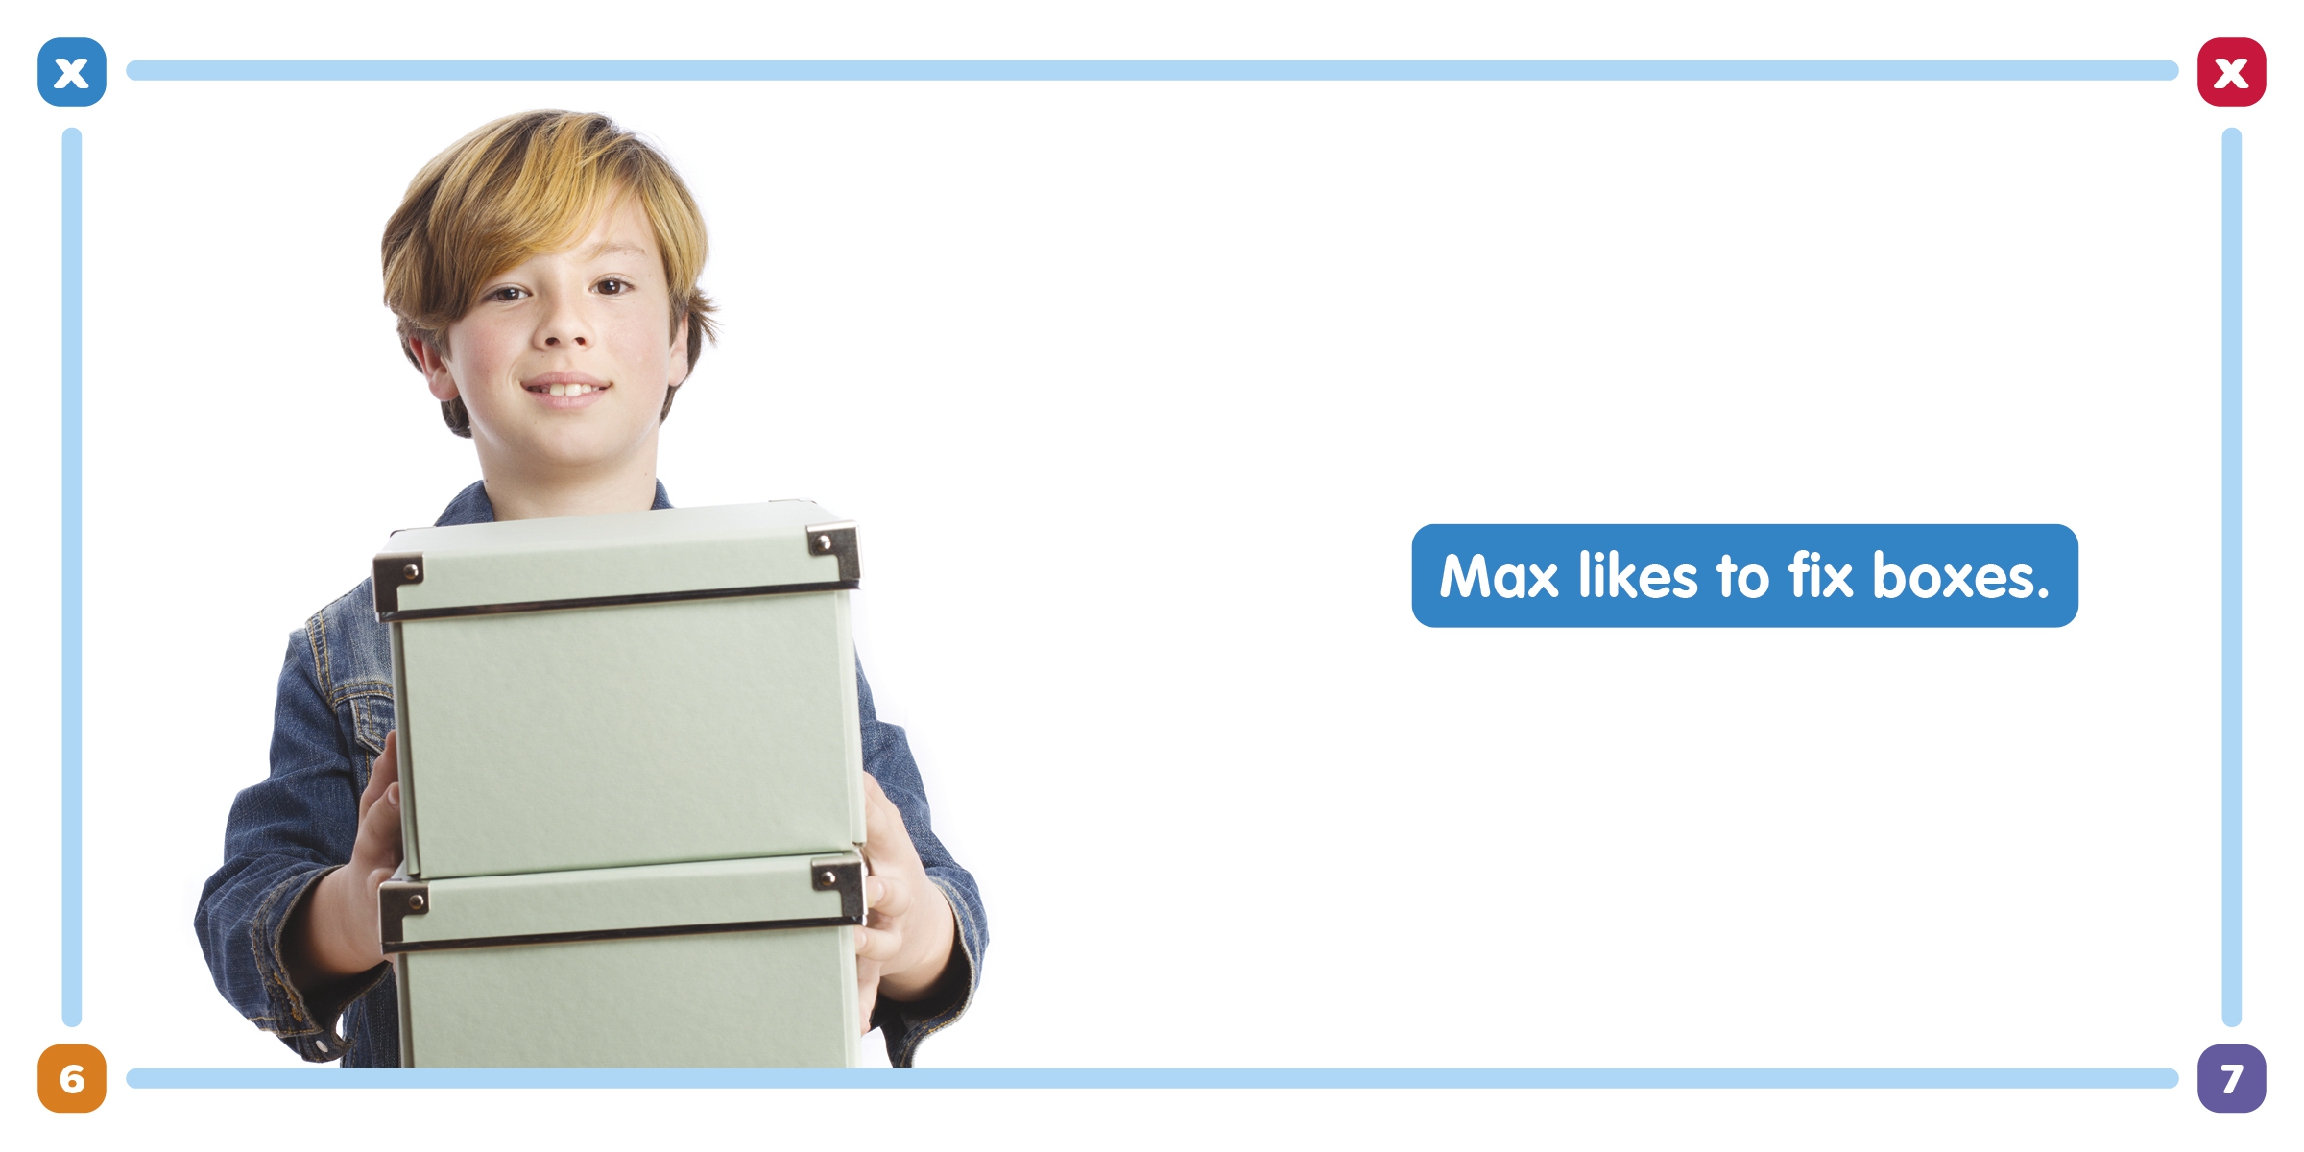 Boxes for Max: The Sound of x